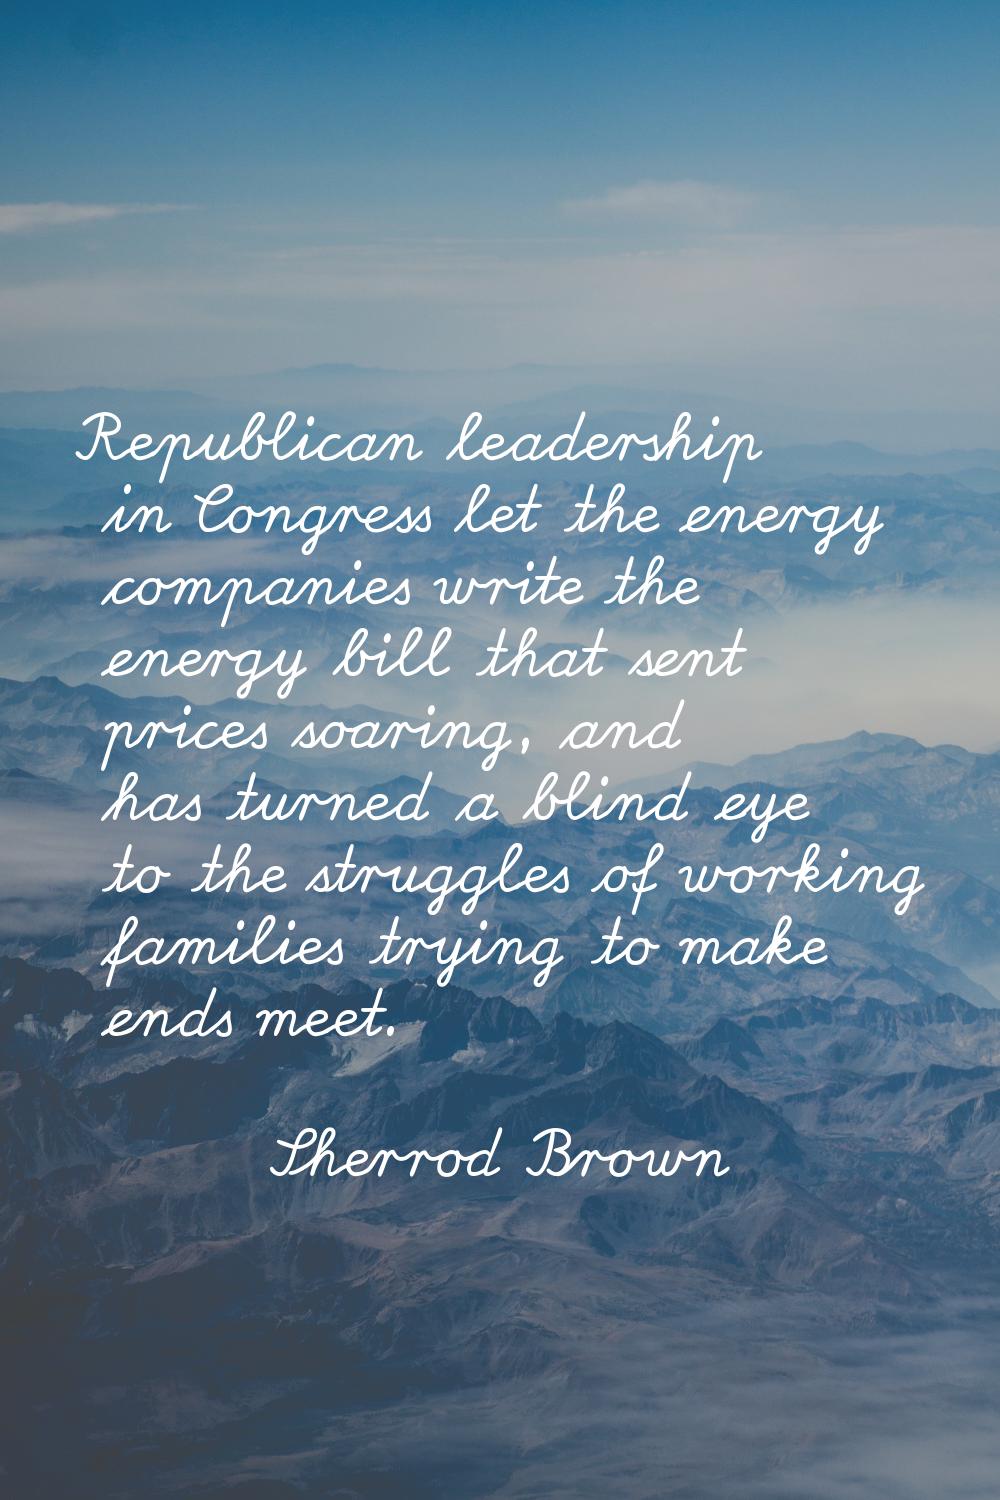 Republican leadership in Congress let the energy companies write the energy bill that sent prices s